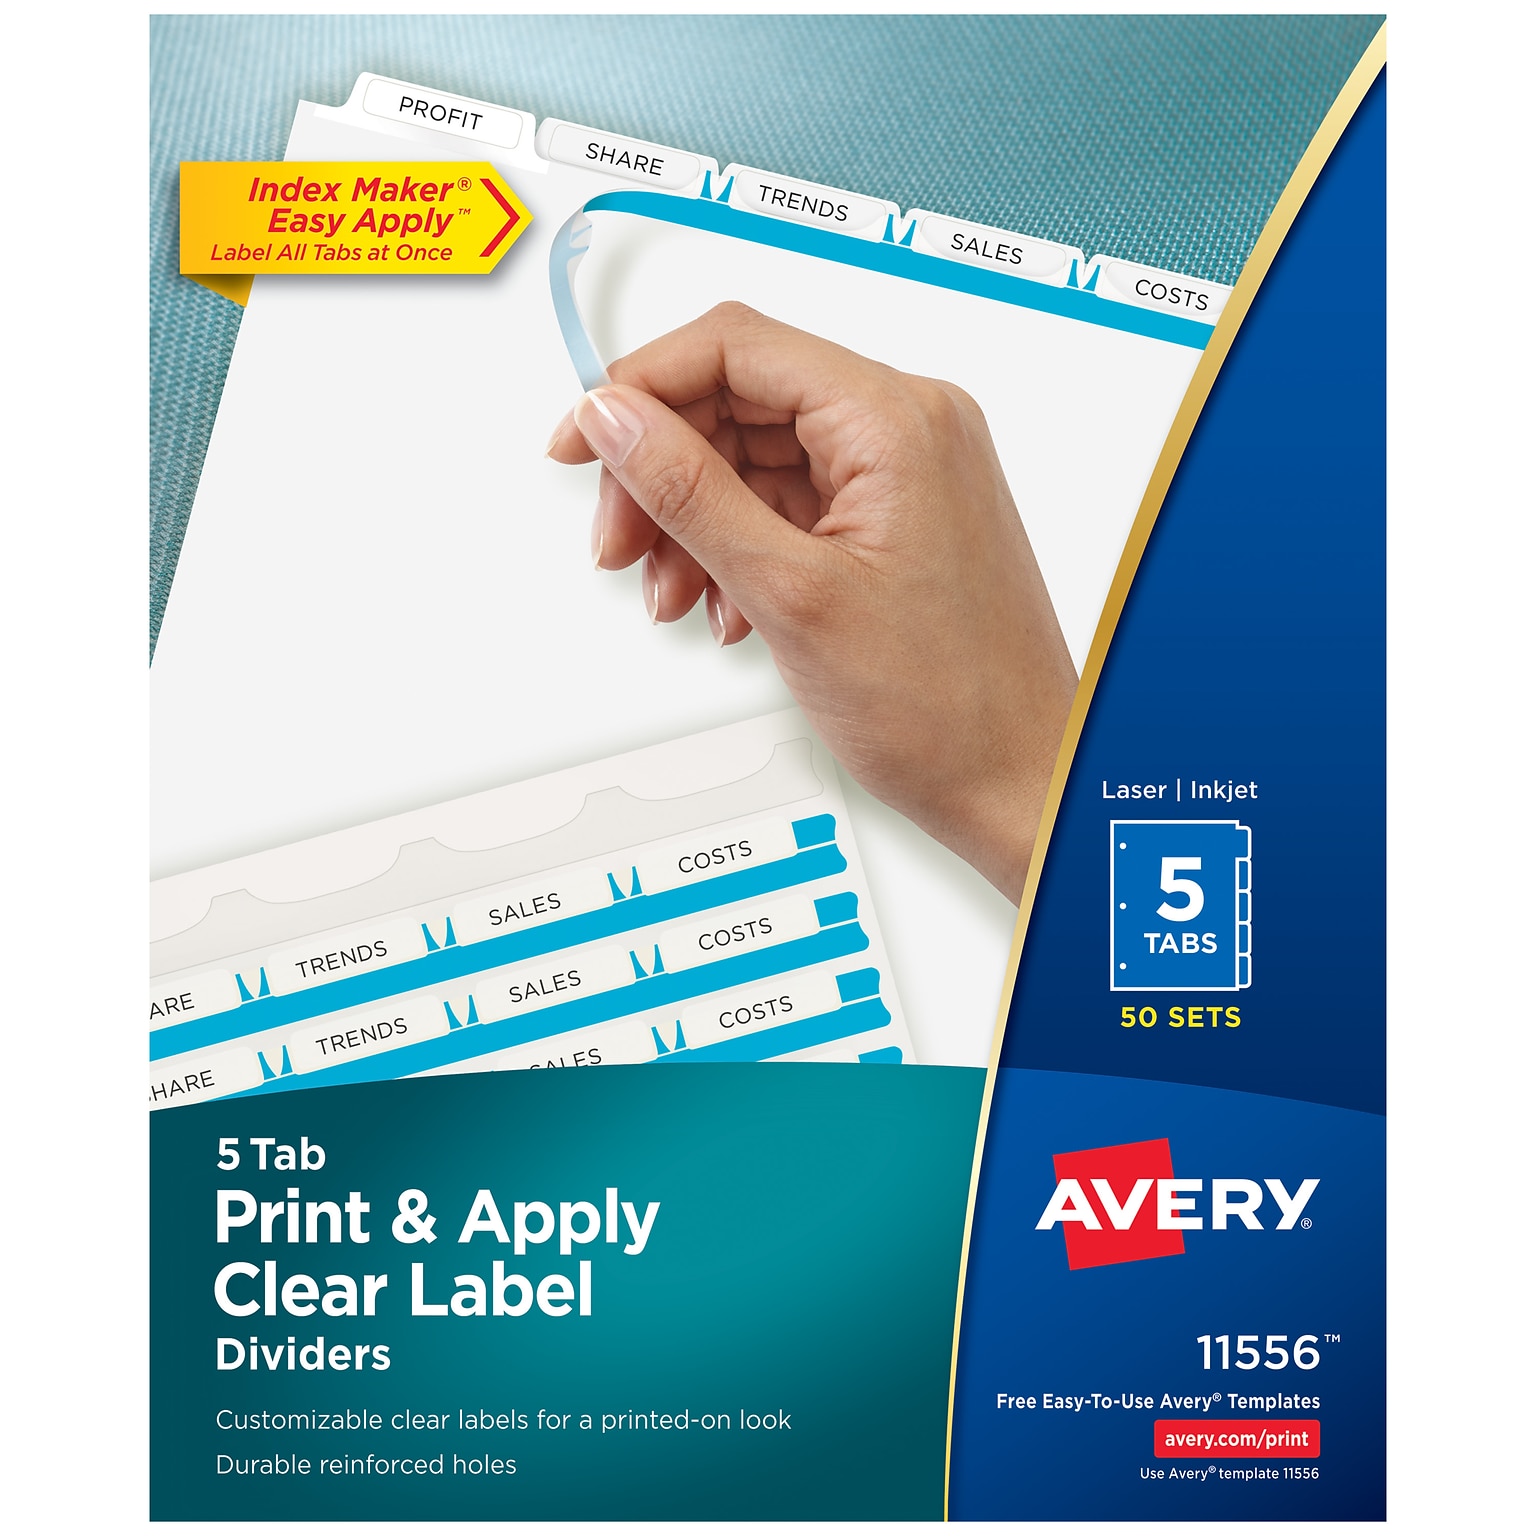 Avery Index Maker Paper Dividers with Print & Apply Label Sheets, 5 Tabs, White, 50 Sets/Pack (11556)